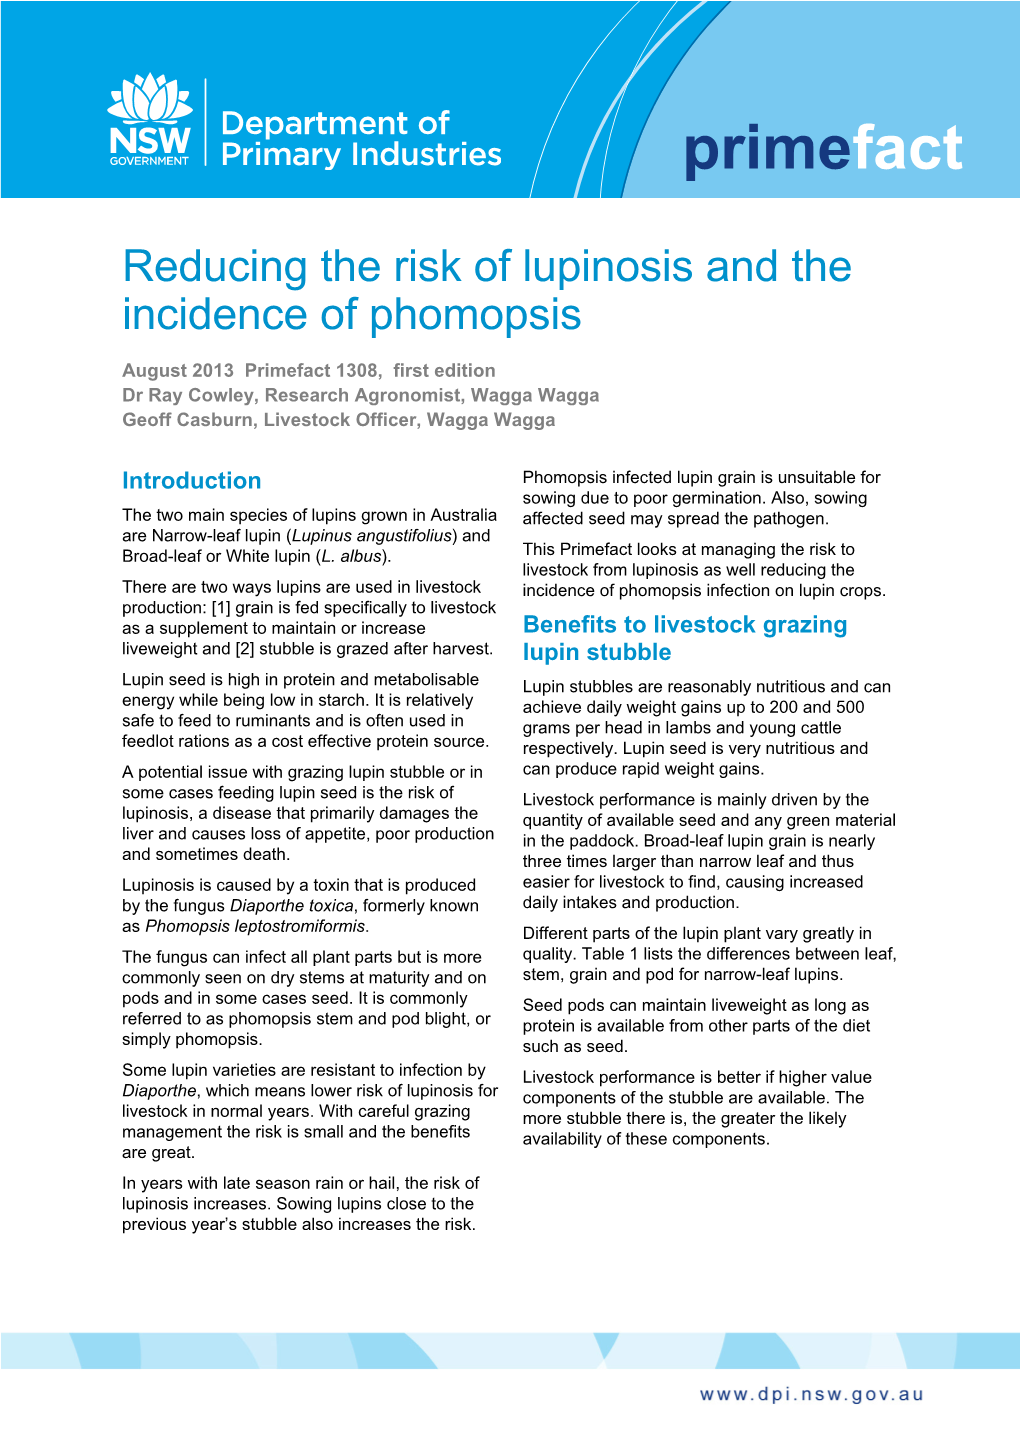 Reducing the Risk of Lupinosis and the Incidence of Phomopsis